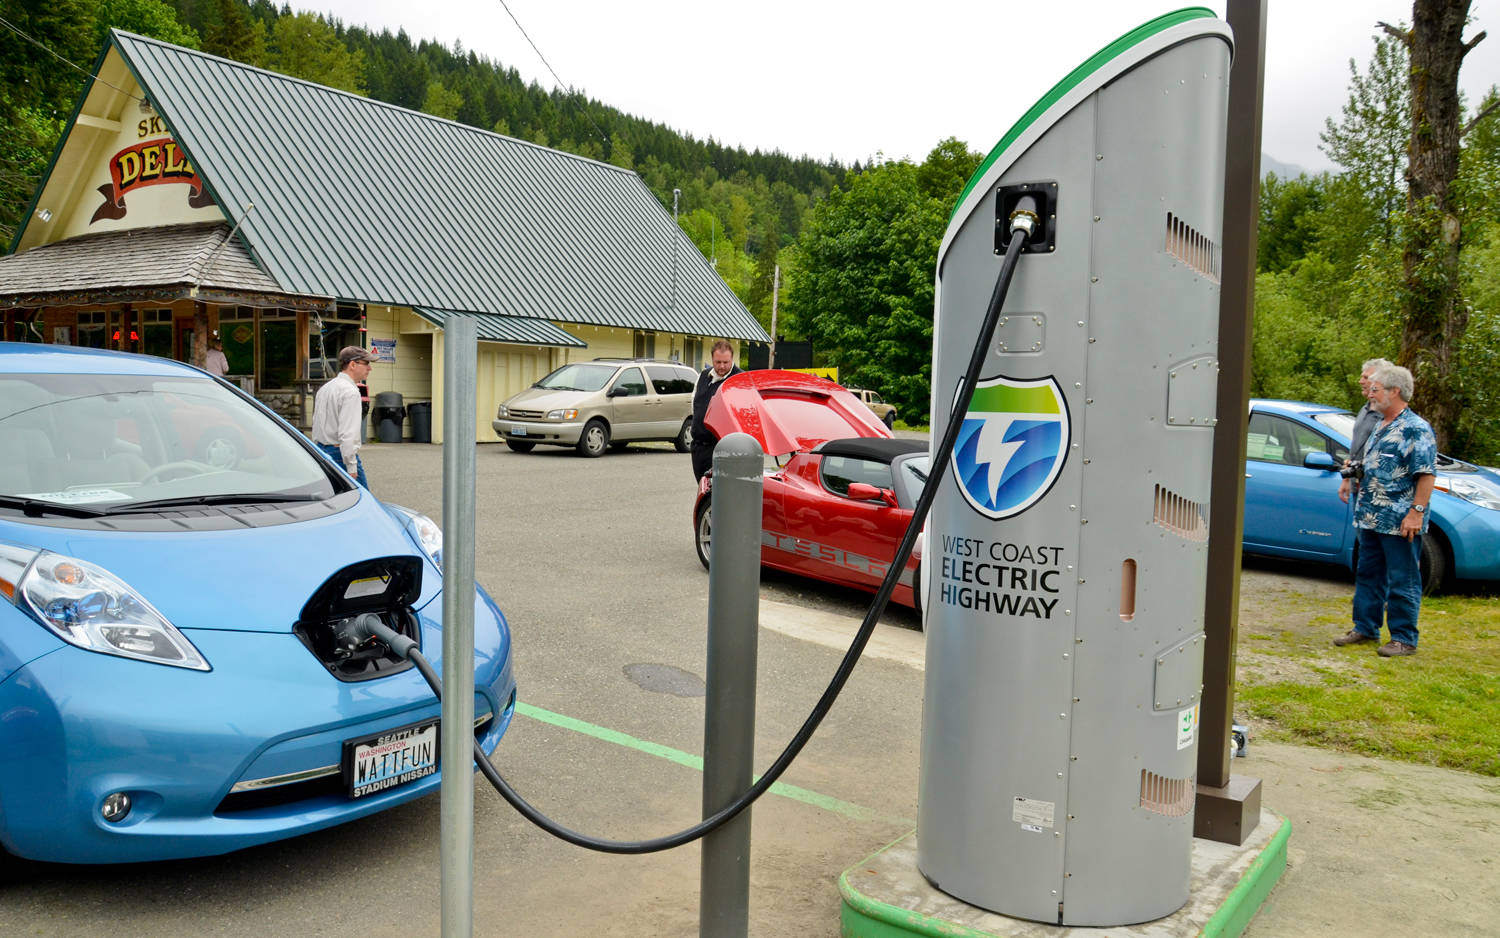 An electric car charging could be coming to a downtown Revelstoke parking lot soon. (Black Press file photo)